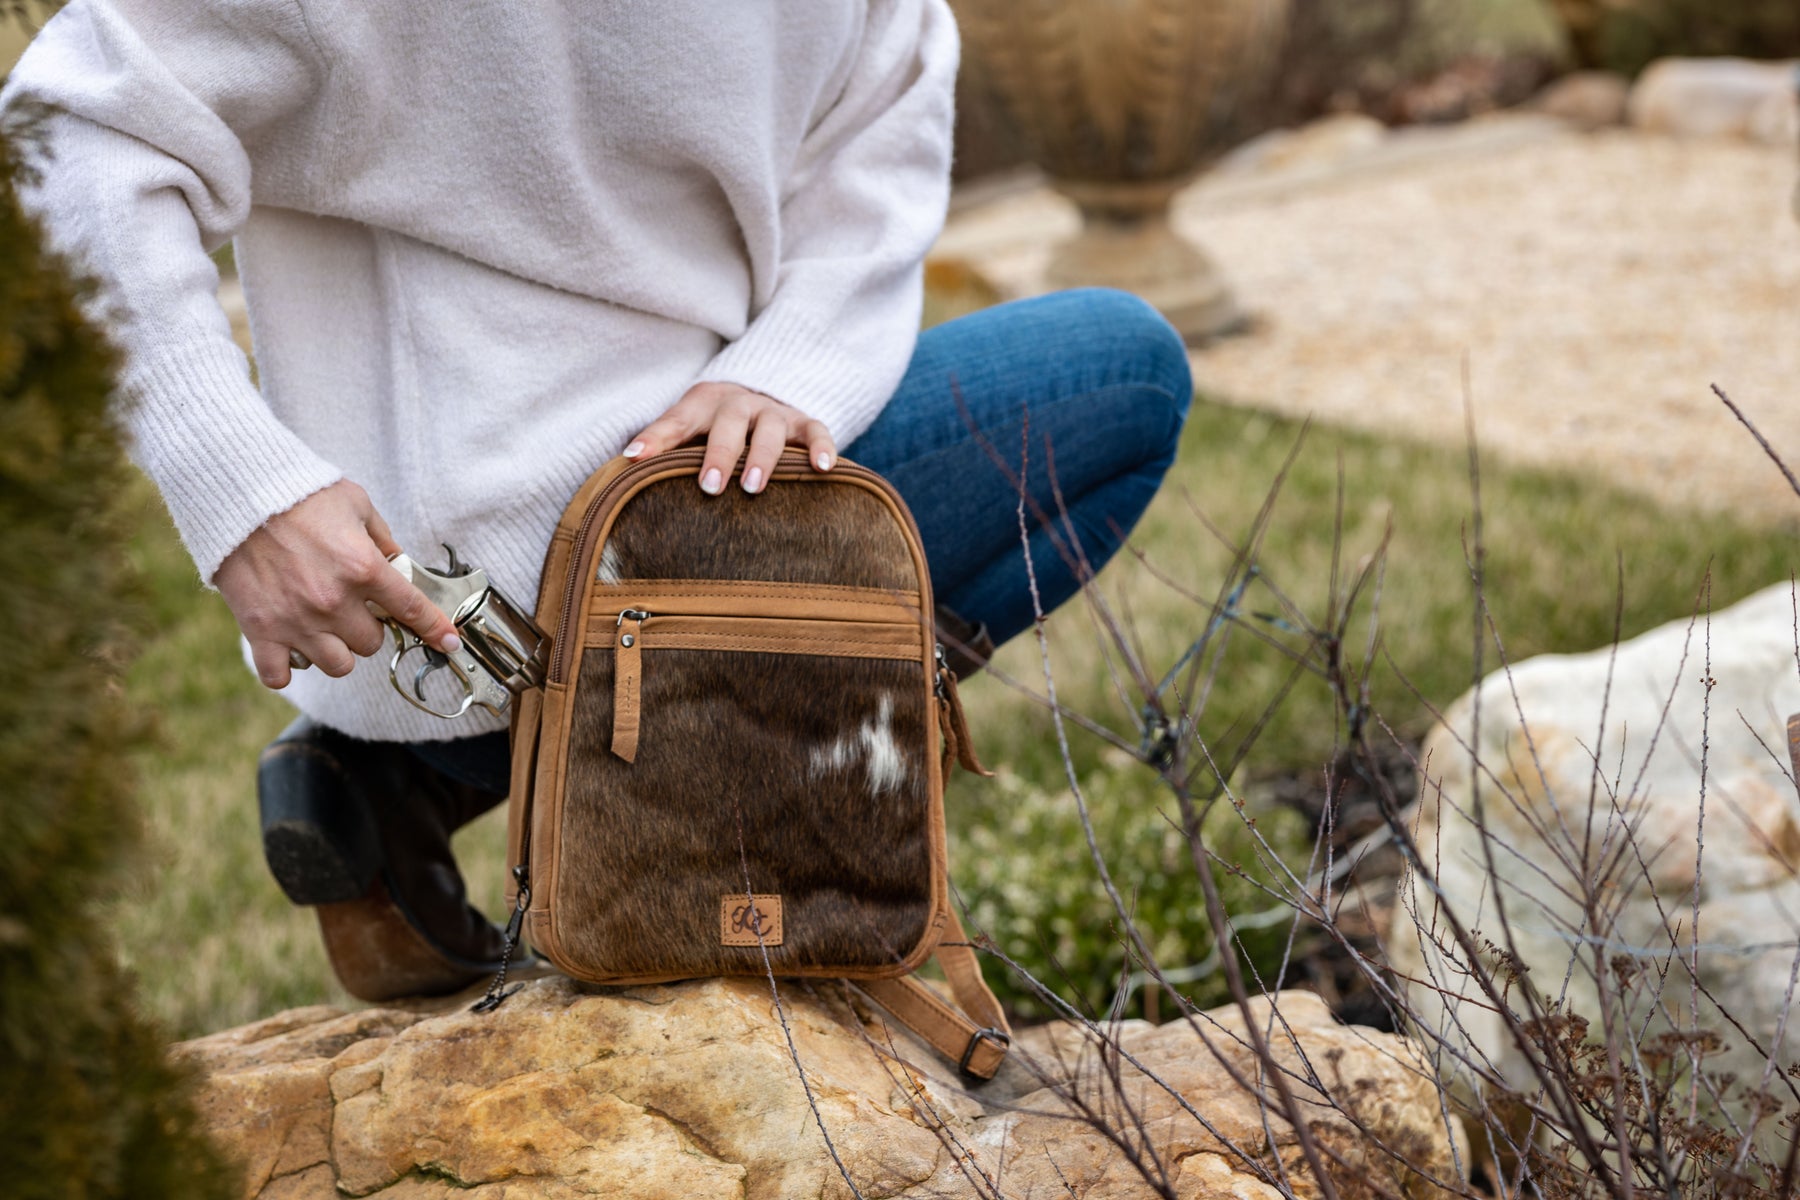 Daisy, Leather Concealed Carry Backpack or Sling